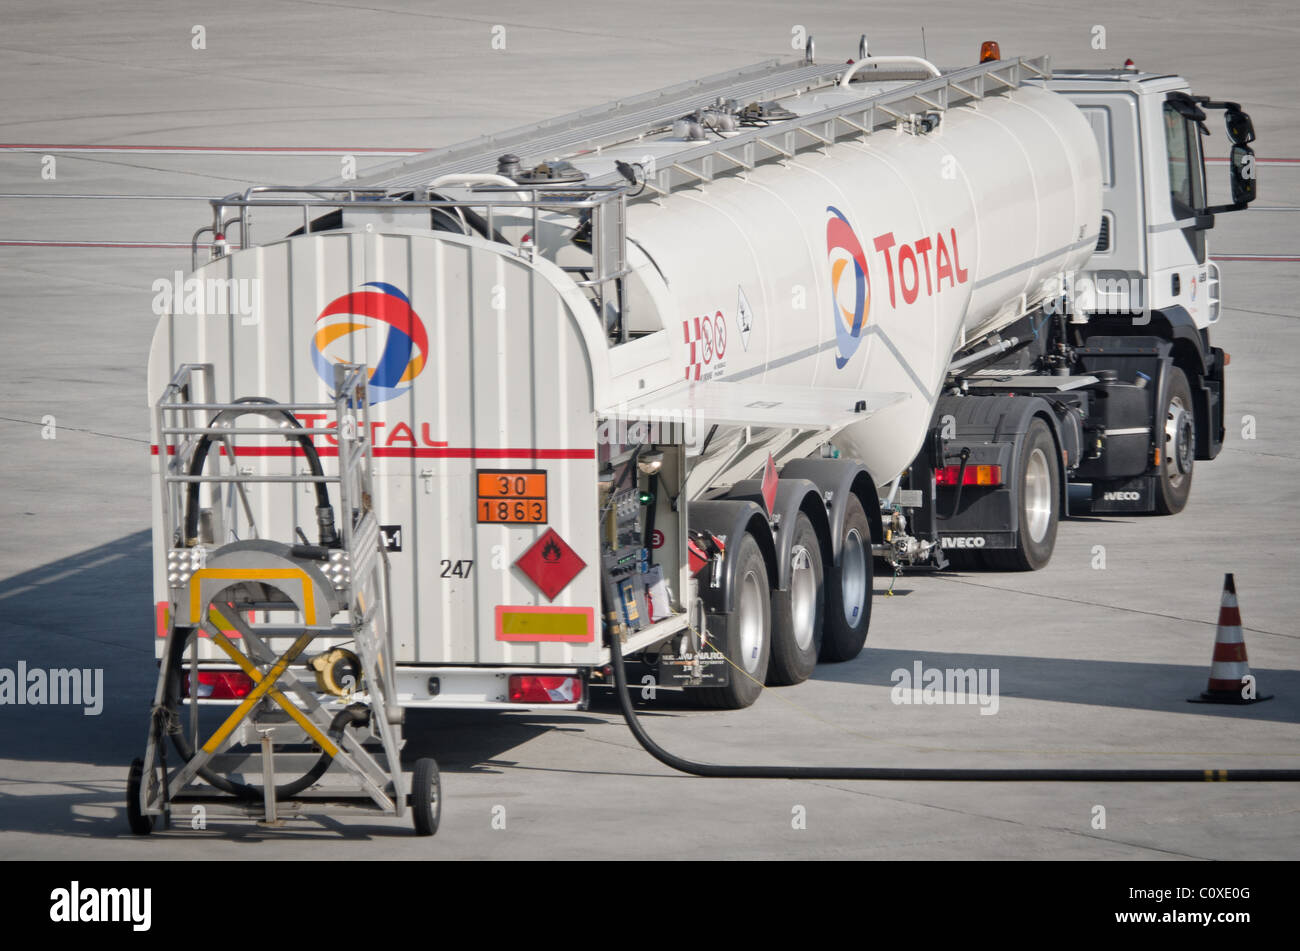 Fuel tanker at airport refueling aircraft Stock Photo